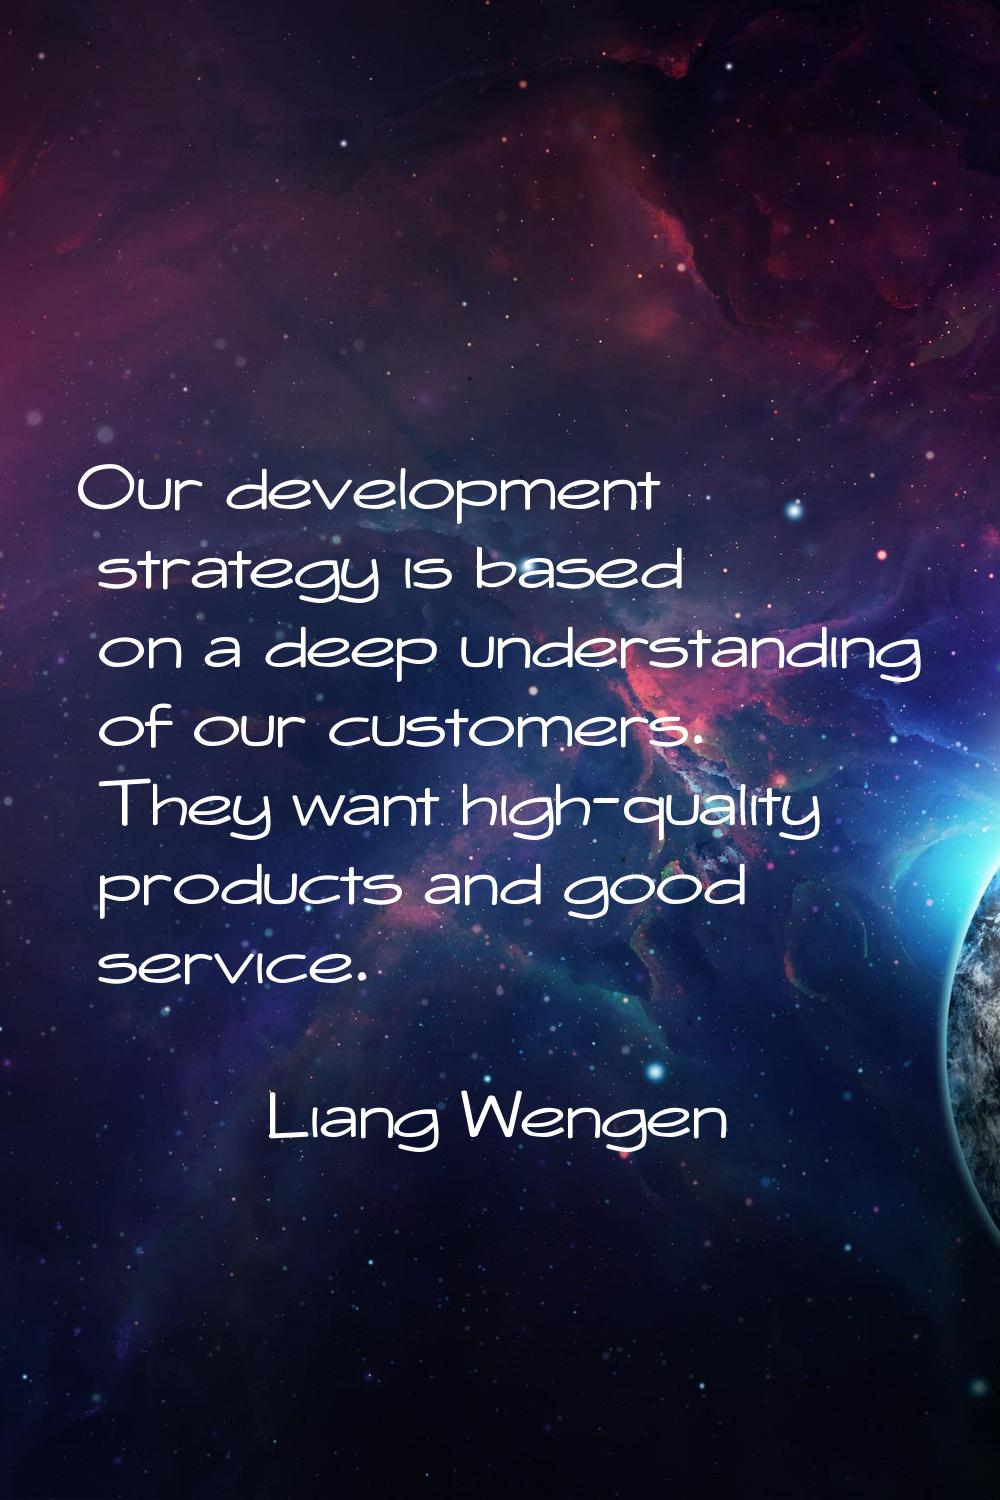 Our development strategy is based on a deep understanding of our customers. They want high-quality 